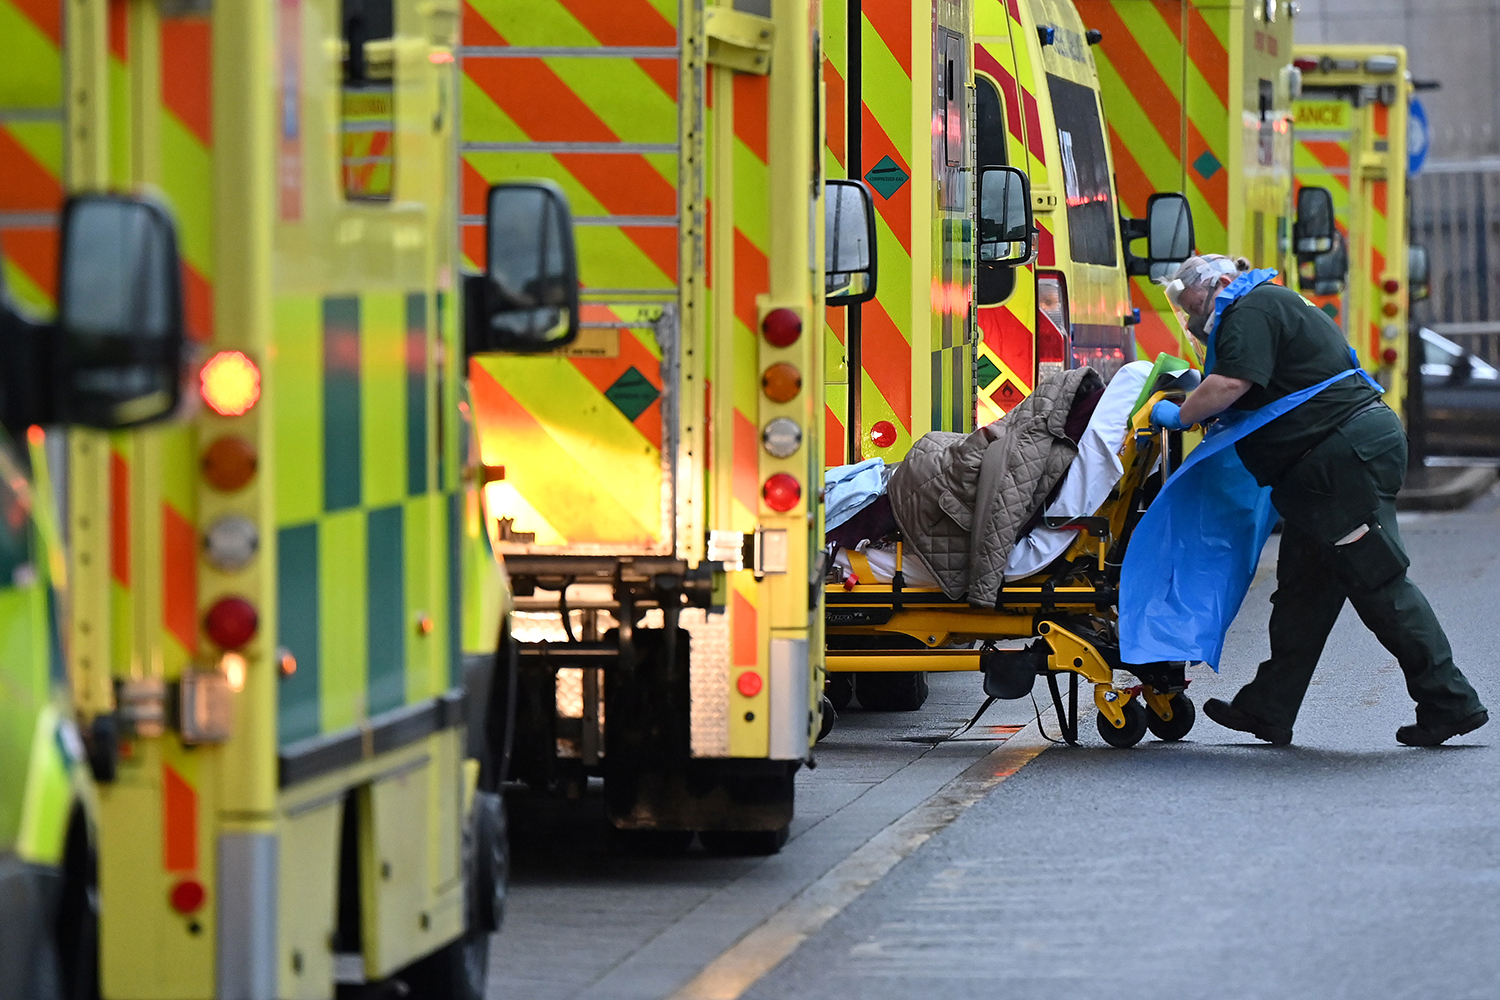 A paramedic pushes a patient near a line of ambulances outside the Royal London Hospital Jan. 5, 2021. JUSTIN TALLIS/AFP via Getty Images